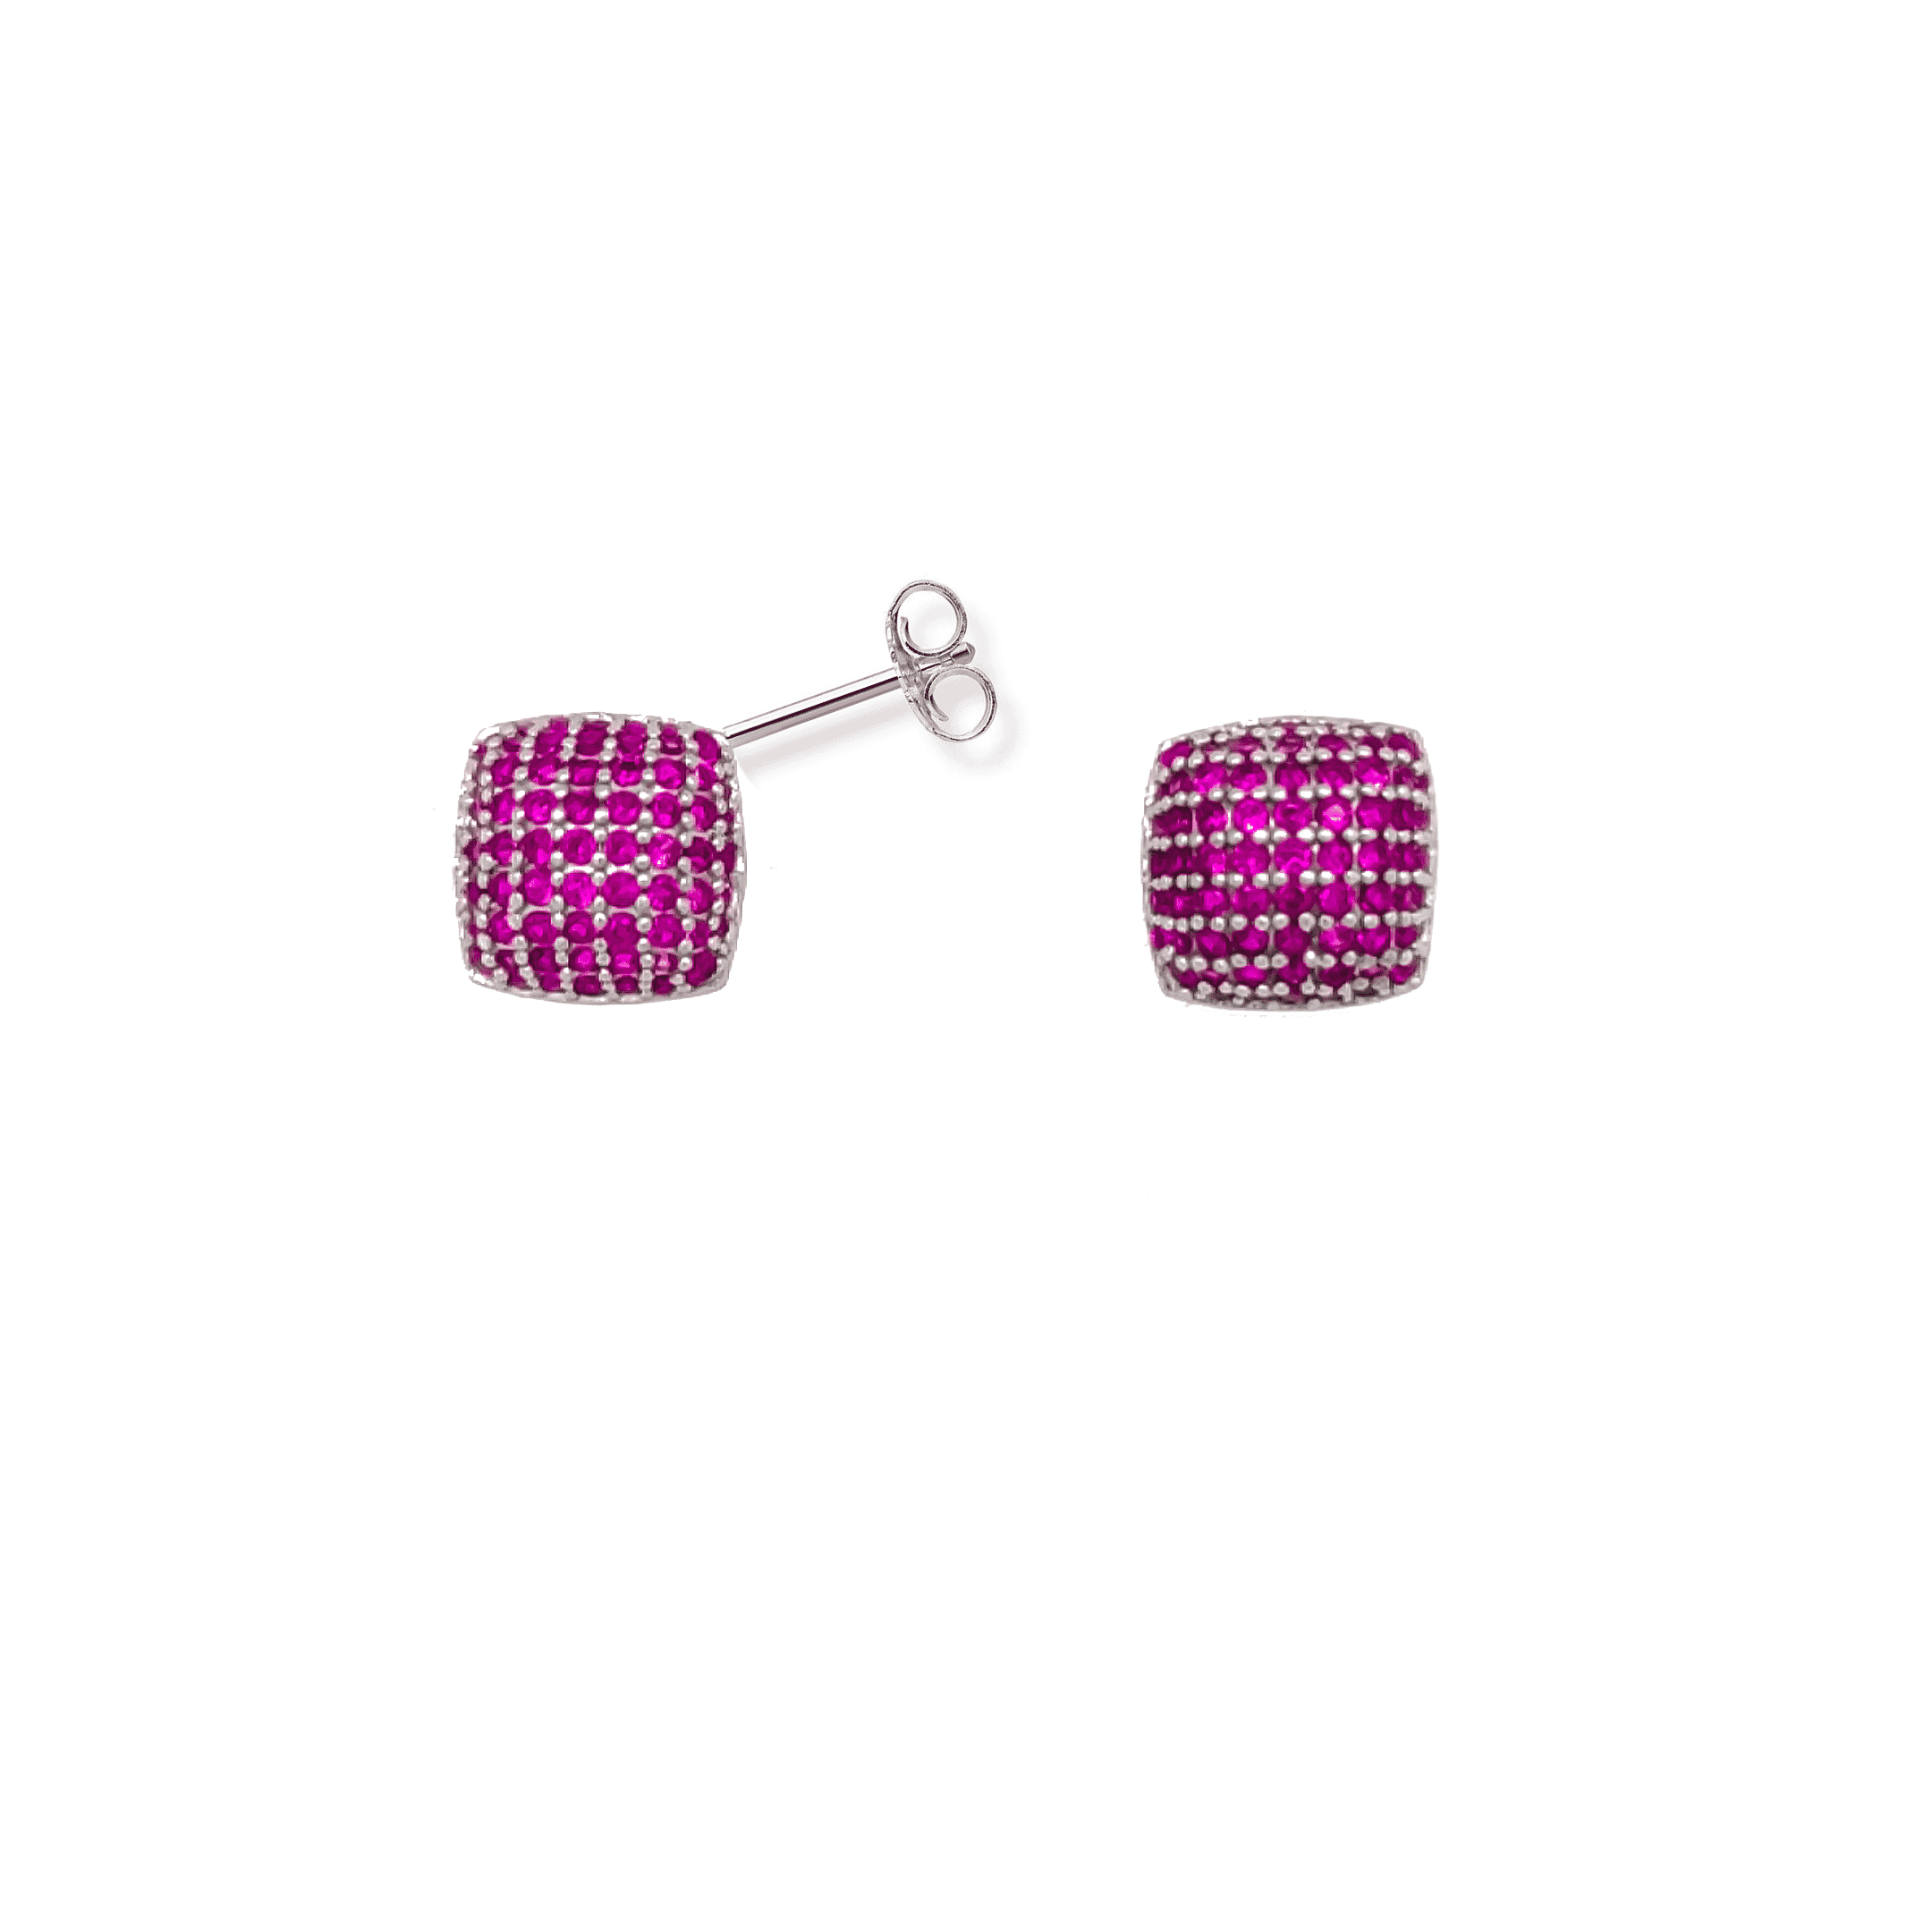 Asfour 925 Sterling Silver Earring - ER0227-F